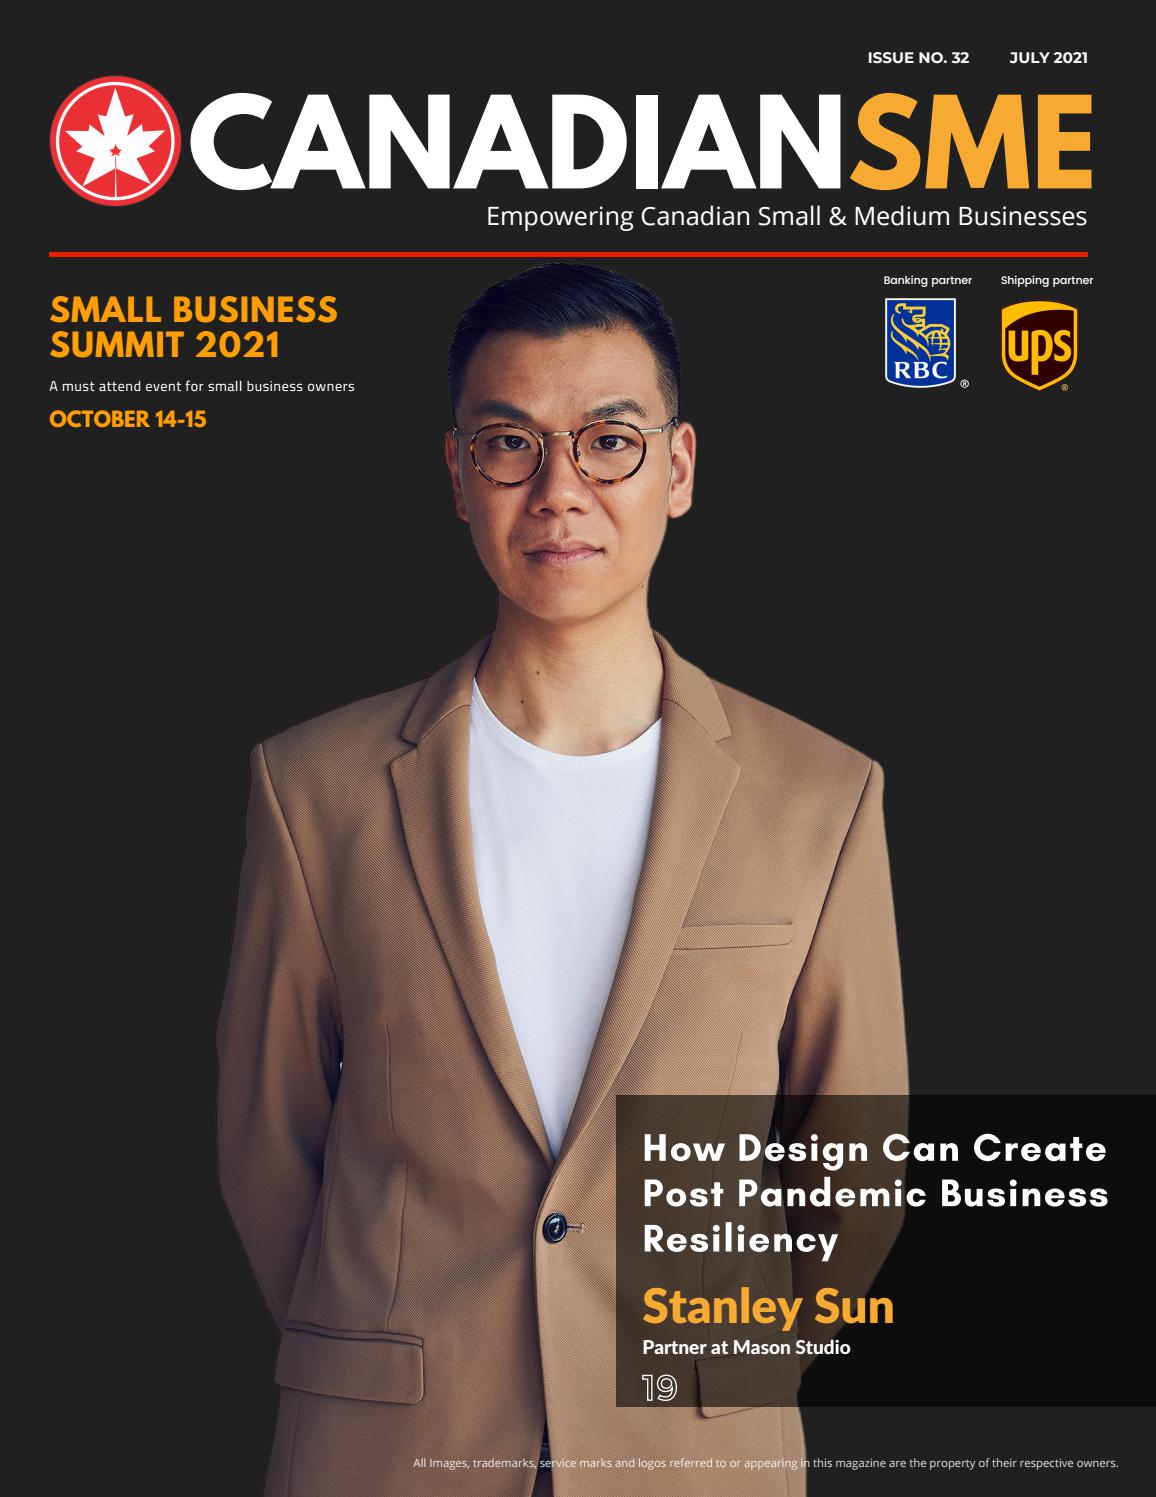 CanadianSME Small Business Magazine July 2021 Issue